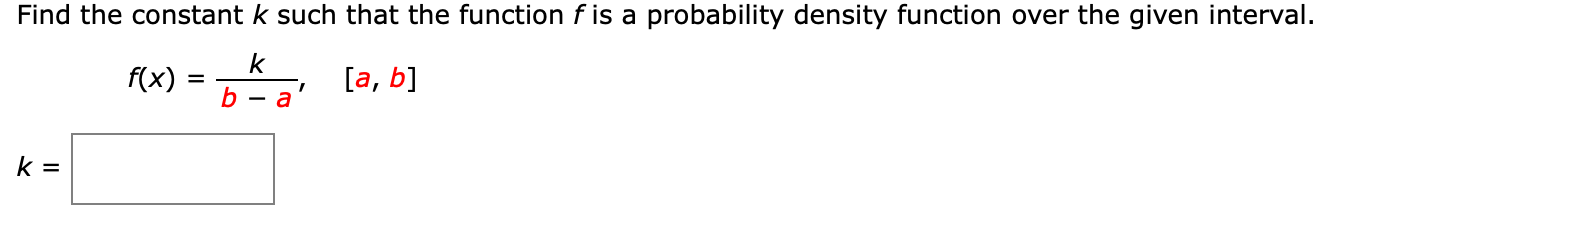 Find the constant k such that the function f is a probability density function over the given interval.
k
f(x)
[а, b]
b — а
k =
